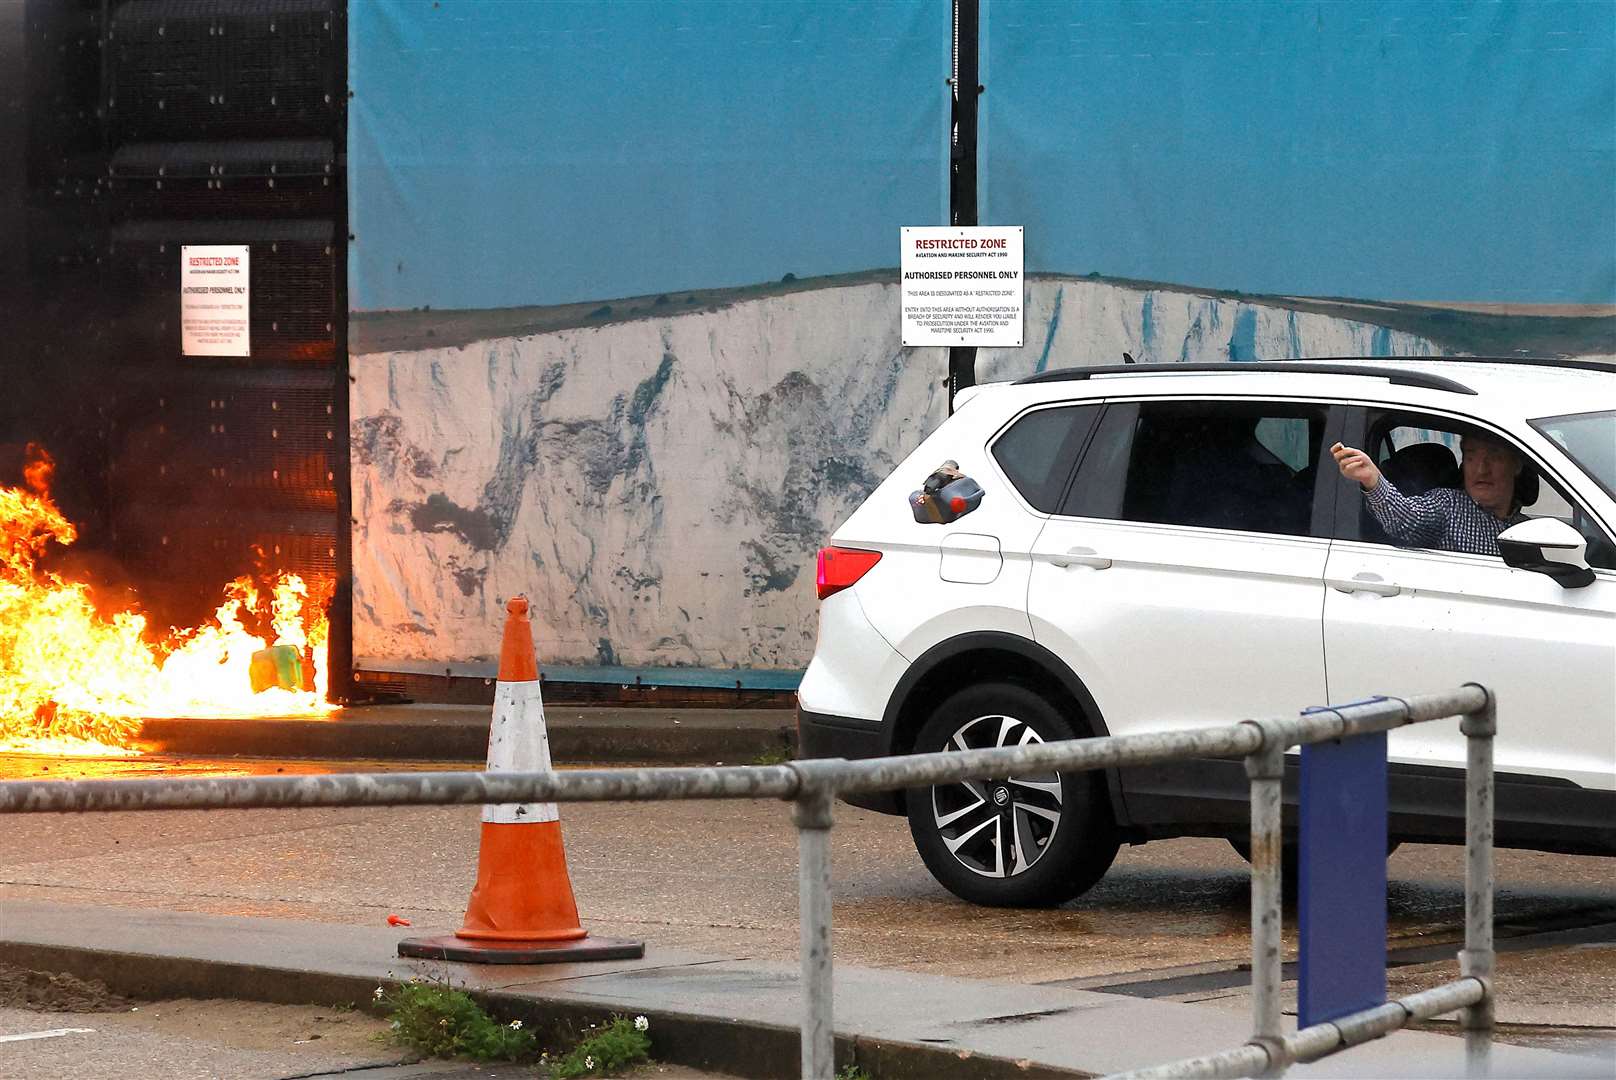 Andrew Leak throws improvised explosives out of his car window in a firebomb attack in Dover. Picture: Reuters/Peter Nicholls